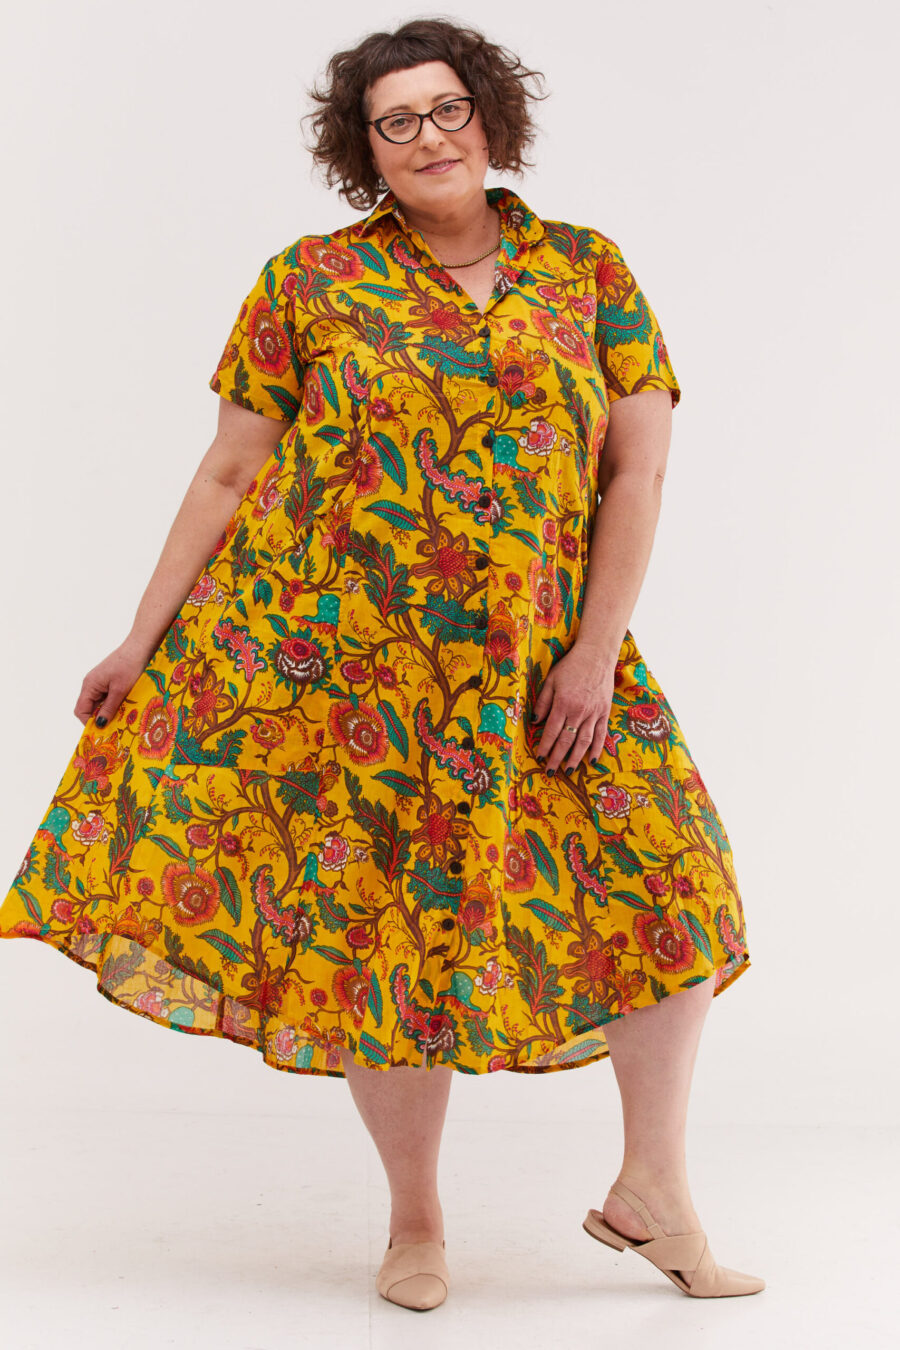 Aiya’le dress | Uniquely designed oversize dress - Yellow flora print, yellow dress with colorful floral print by comfort zone boutique